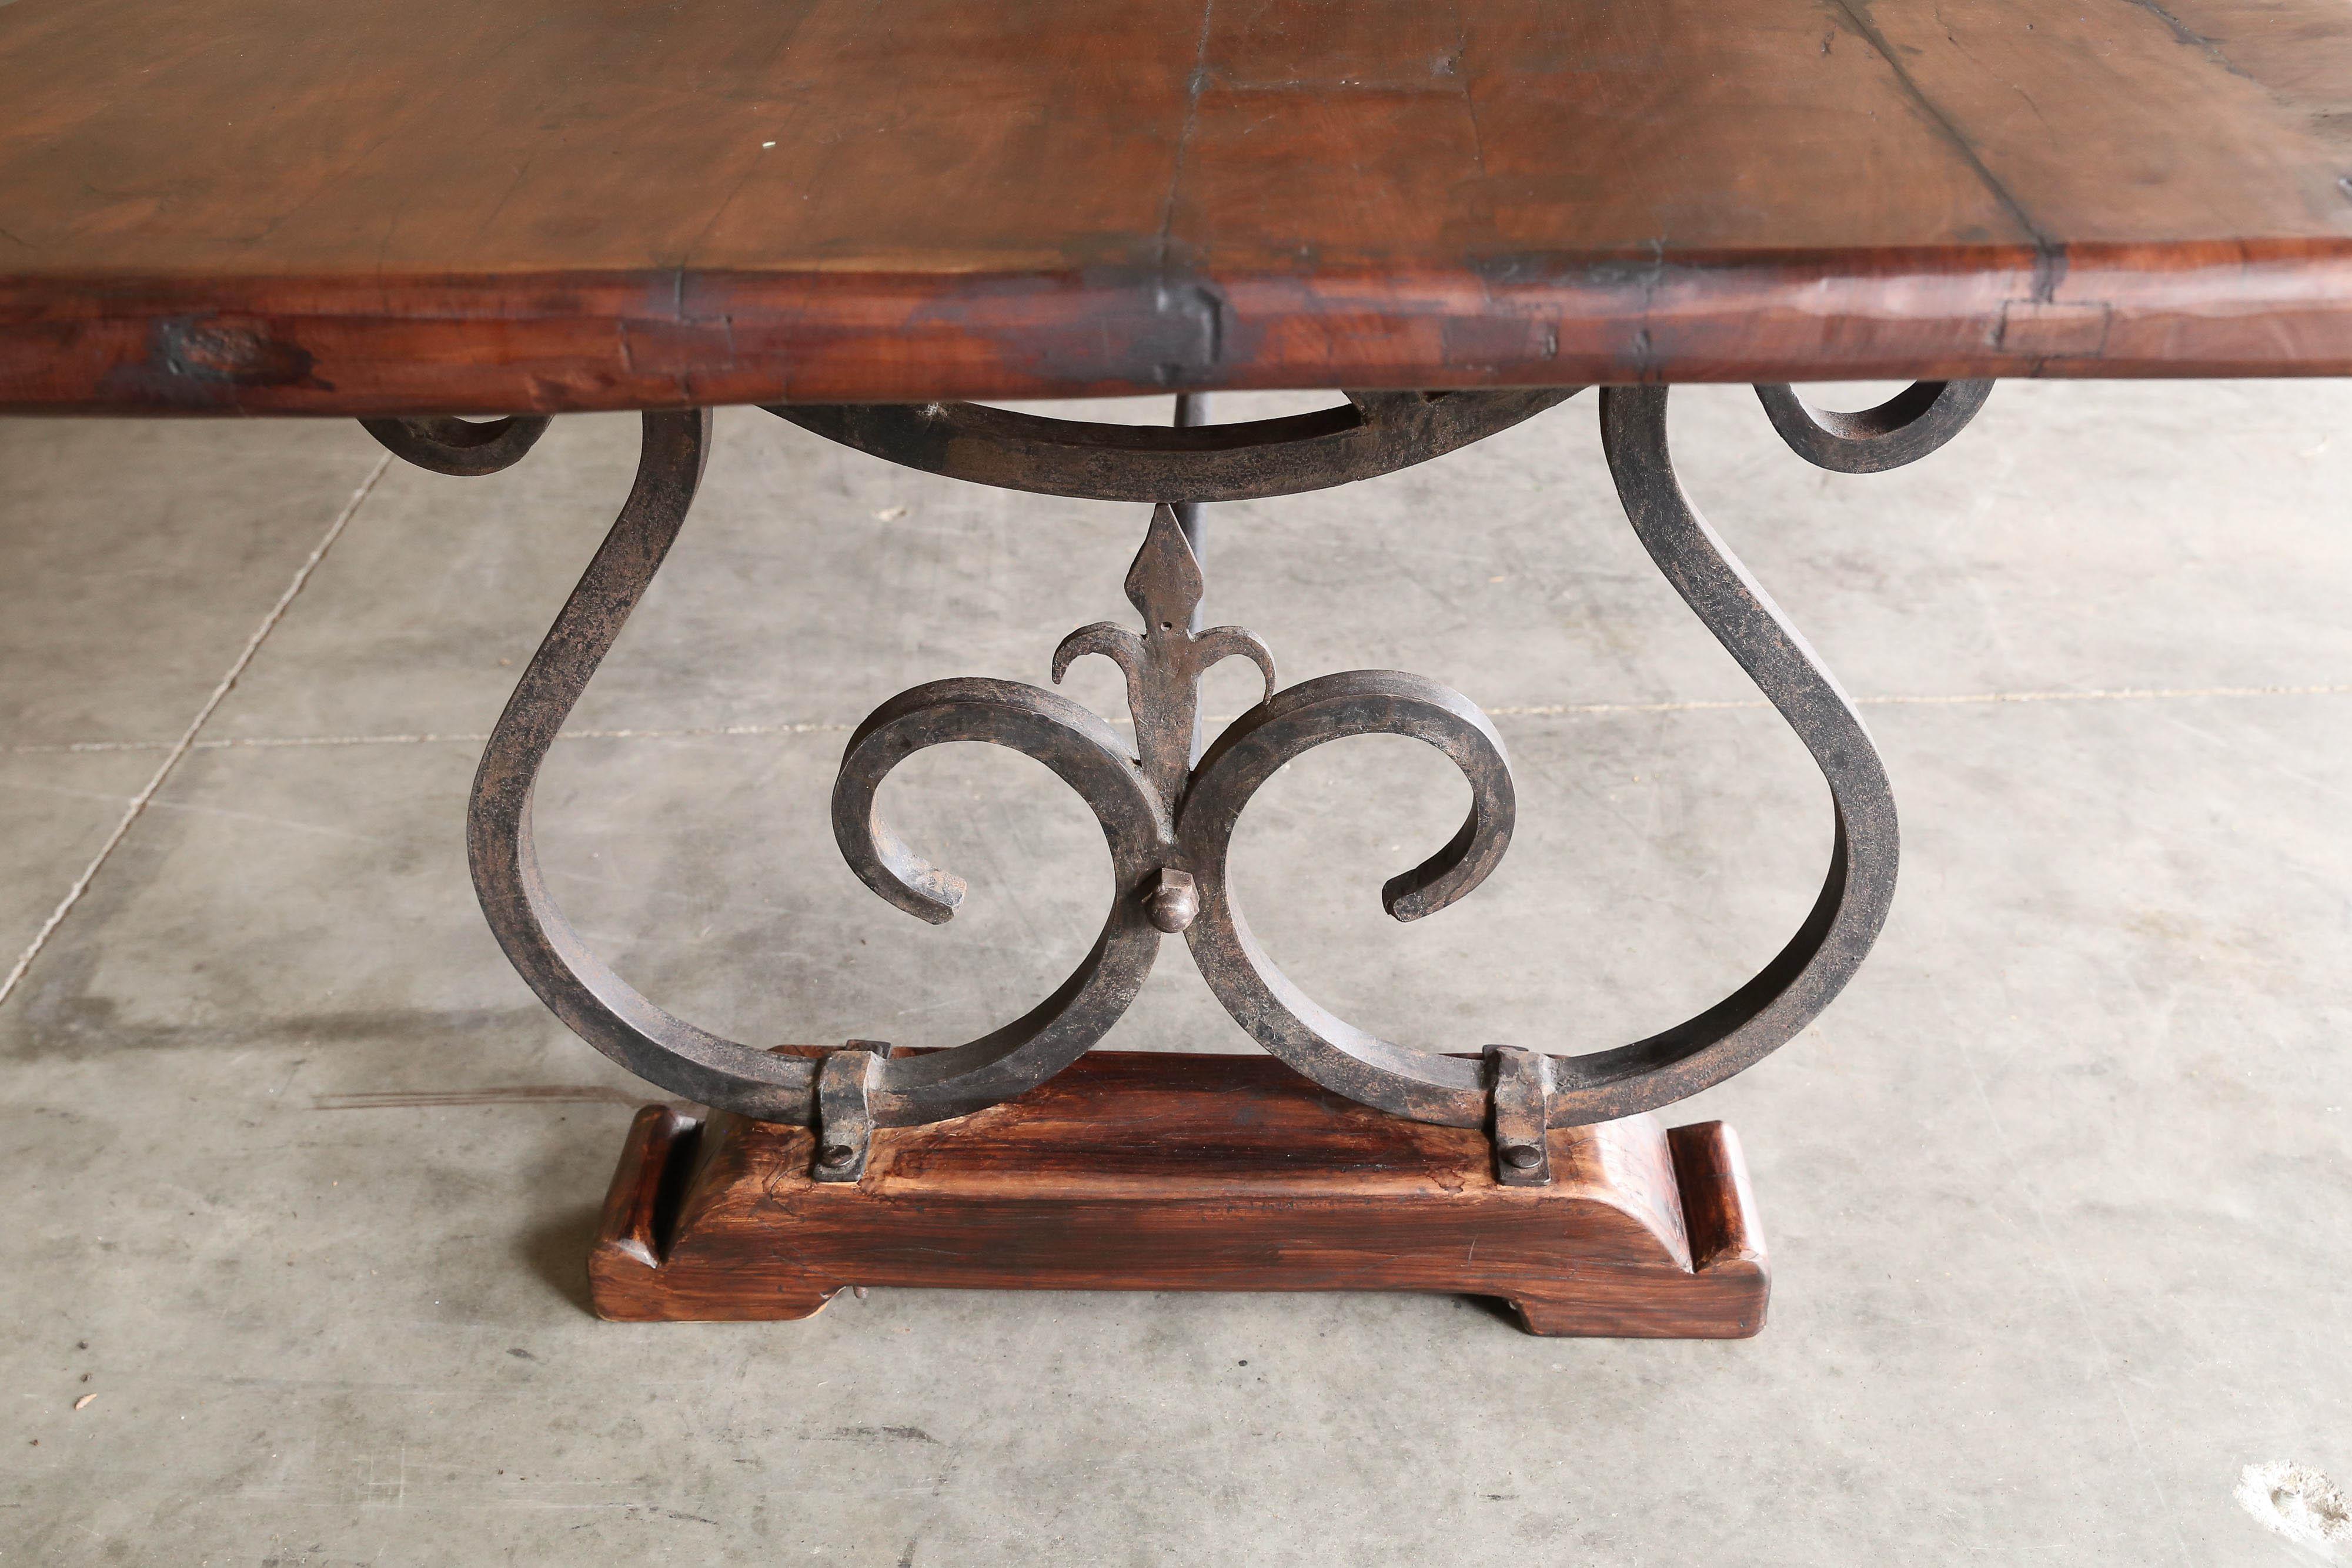 A historic table for Thanks Giving dinner. Another table better than this cannot be found in the market for a grand family gathering. The top is a thick handcrafted solid teak wood all through. It has unmatched mellowing wood patina.
The top is